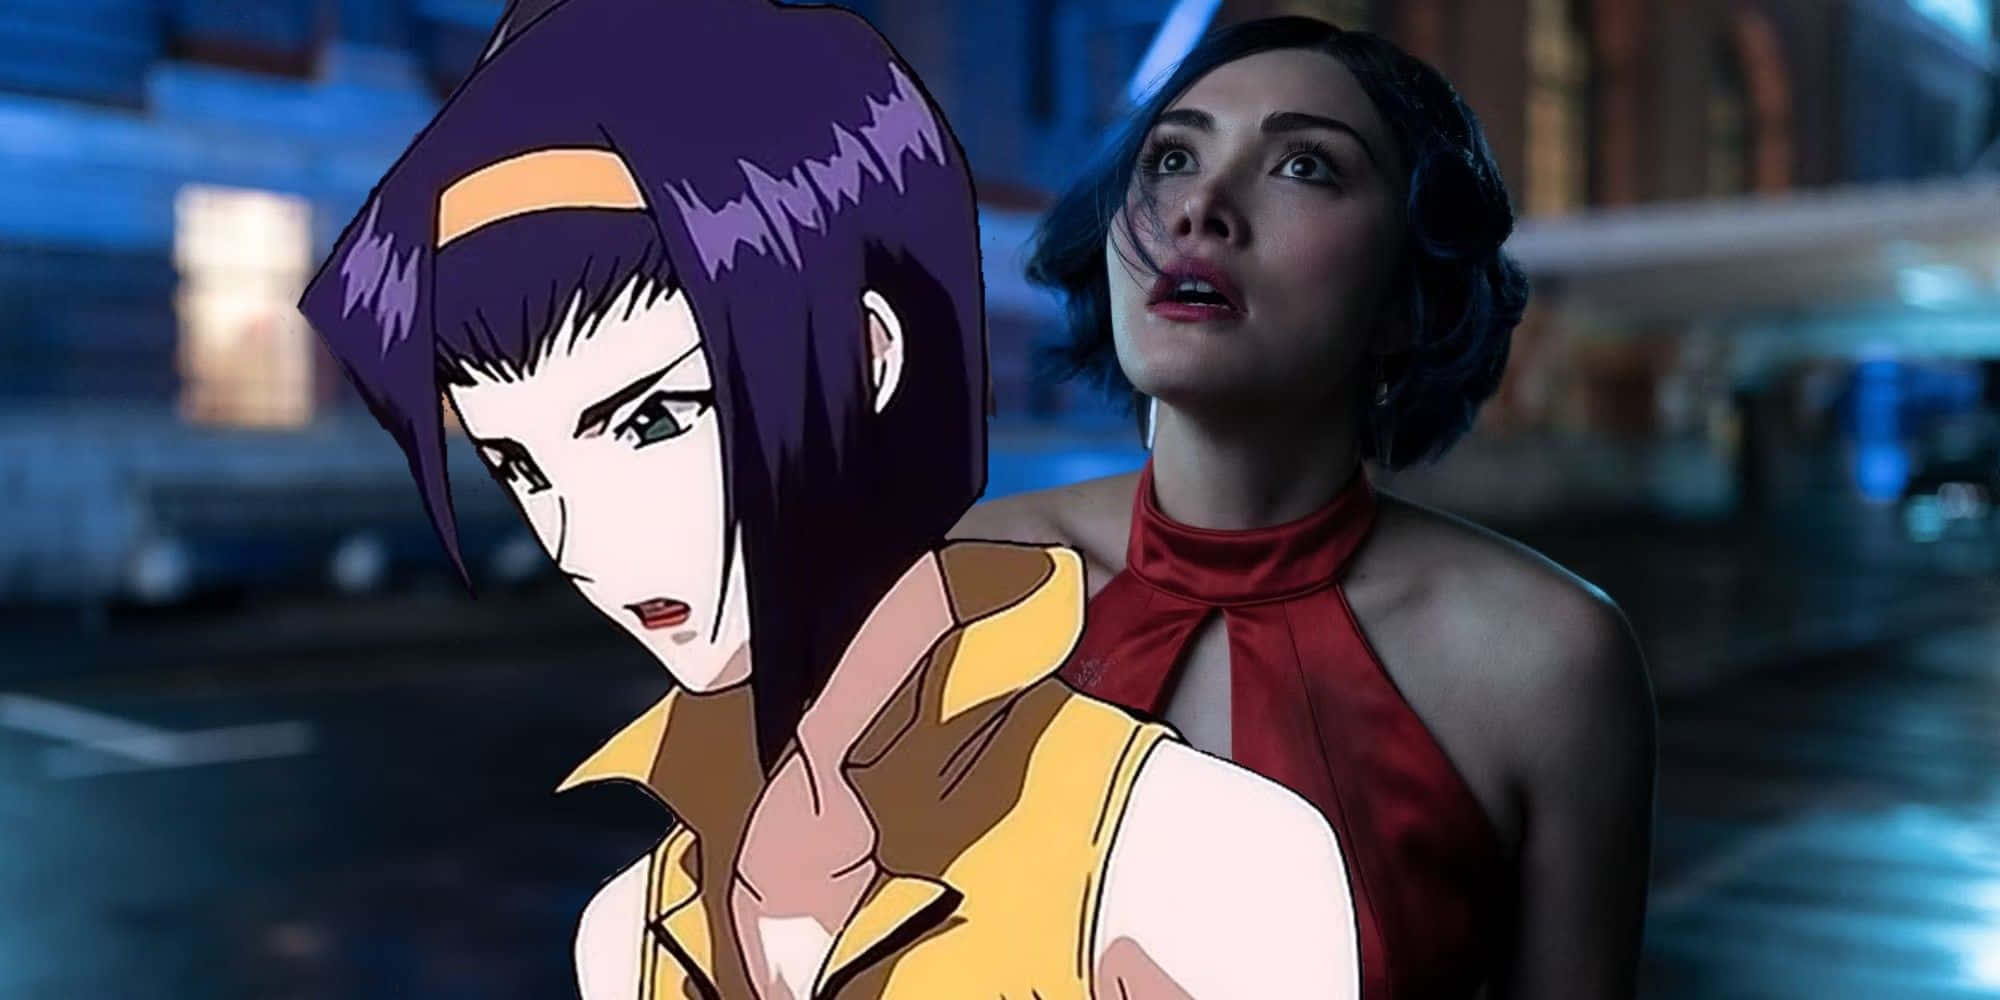 Faye Valentine striking a pose in style Wallpaper